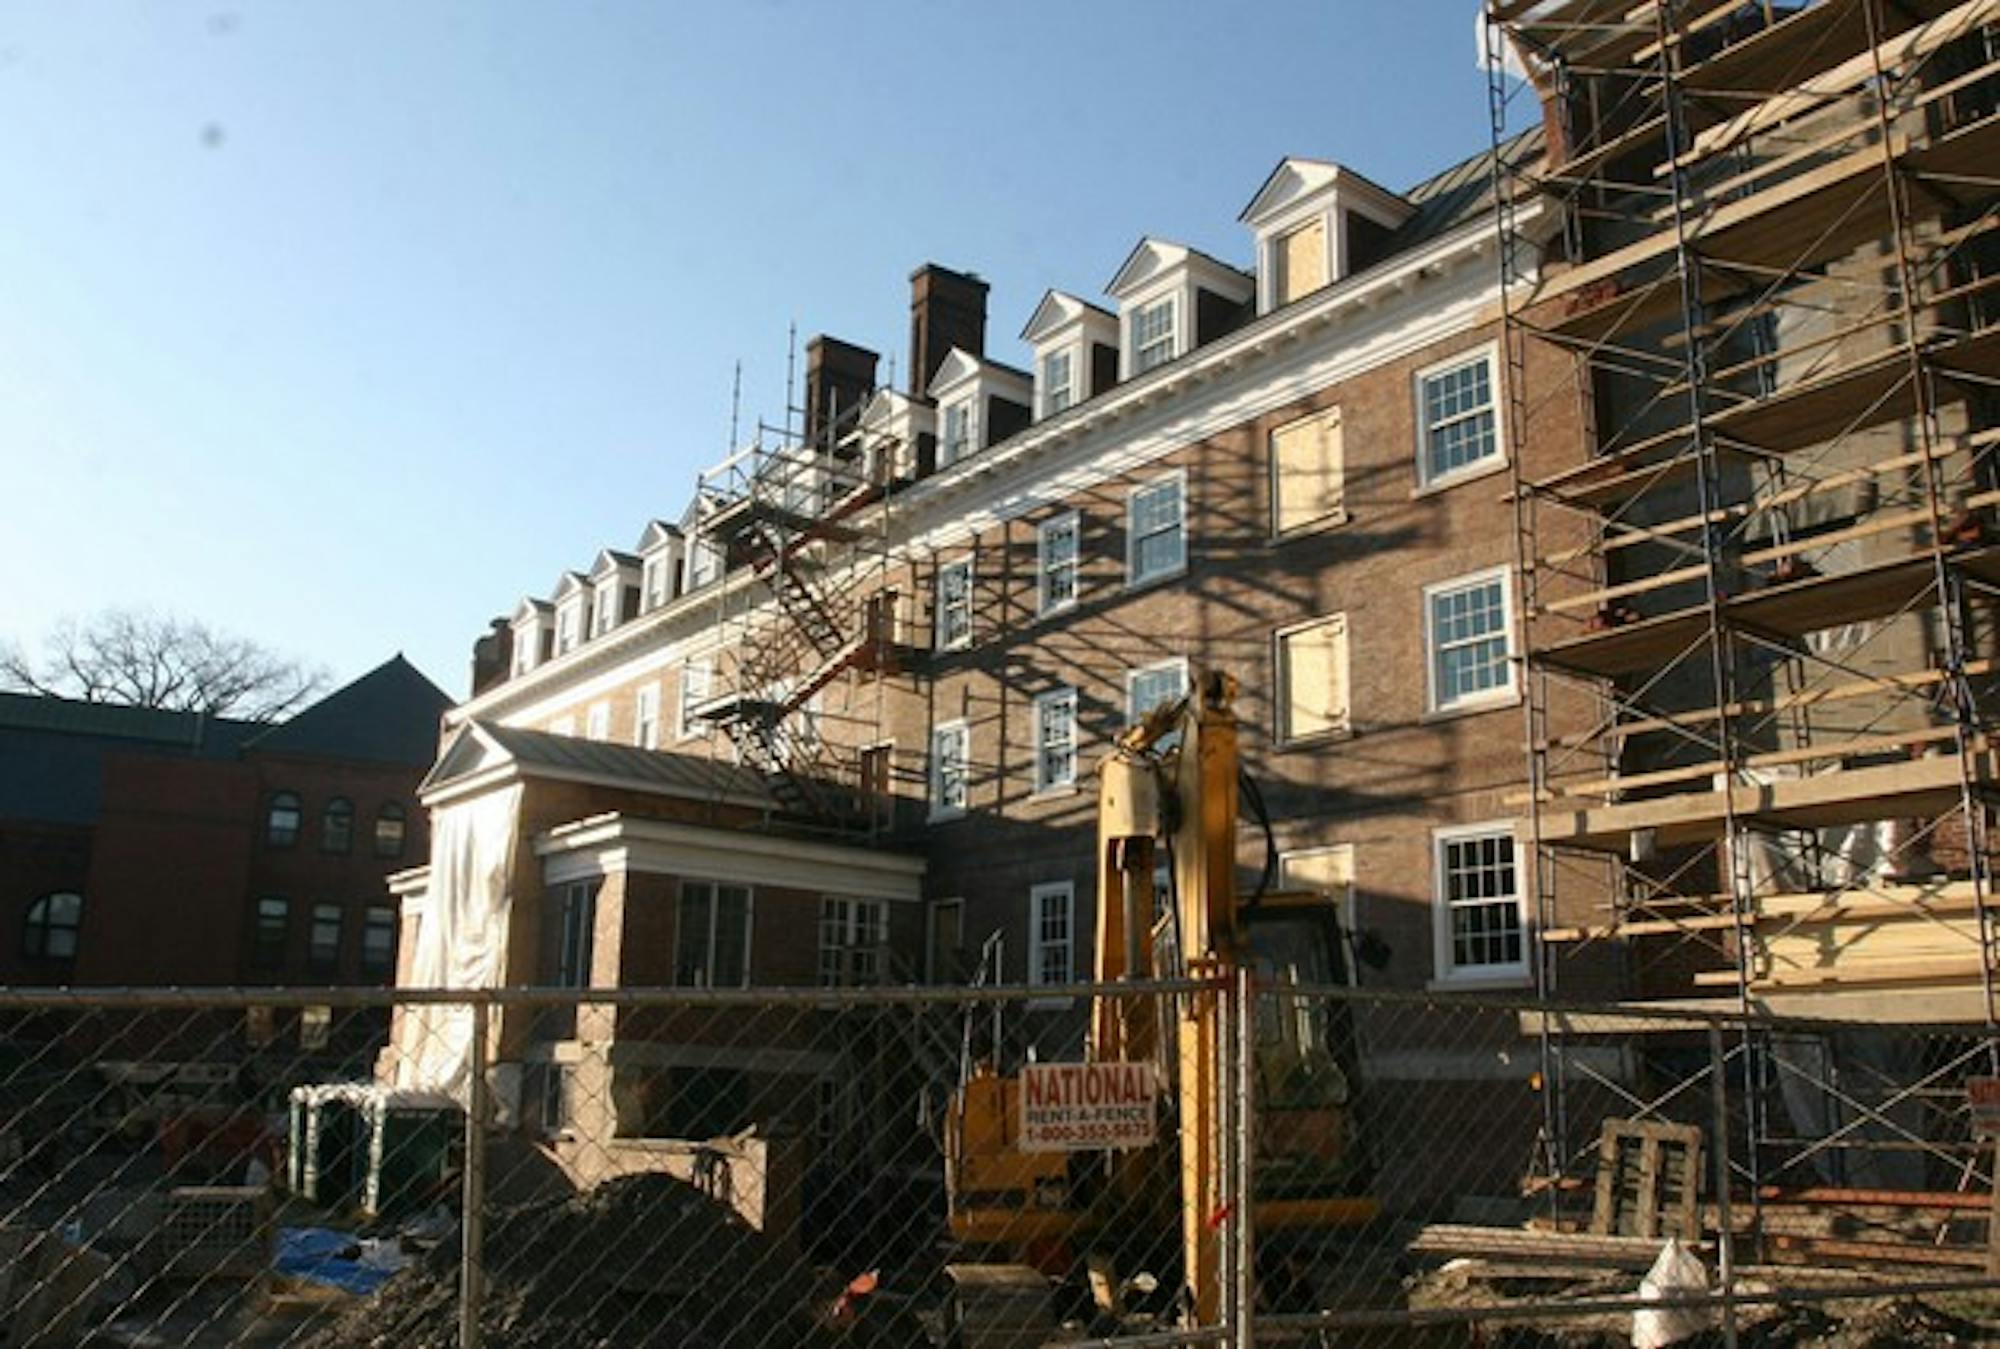 Construction on New Hampshire Hall will likely be completed by spring.